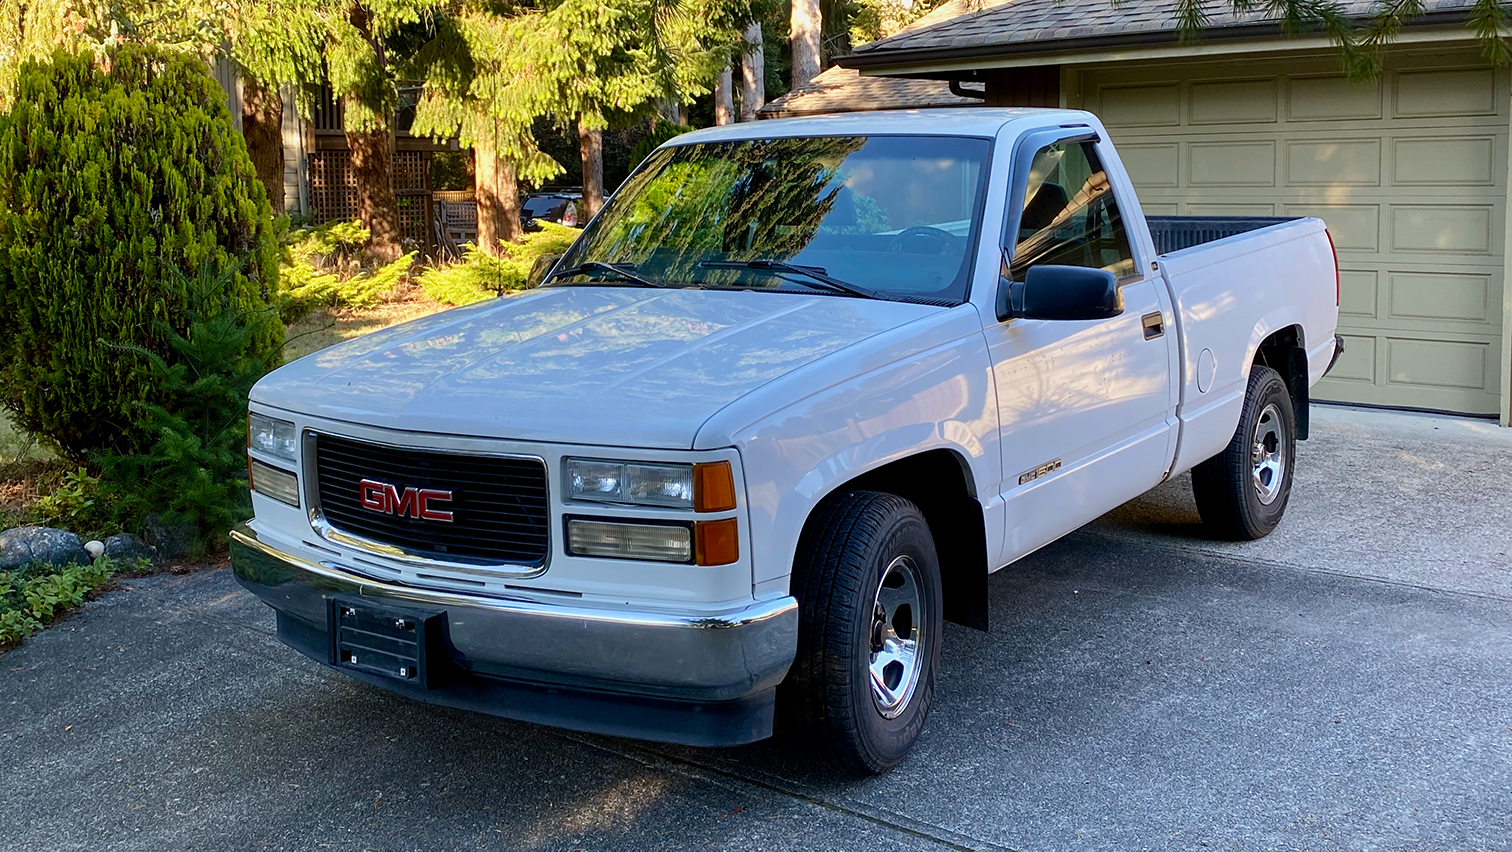 Photo of a 1997 GMC 1500 truck